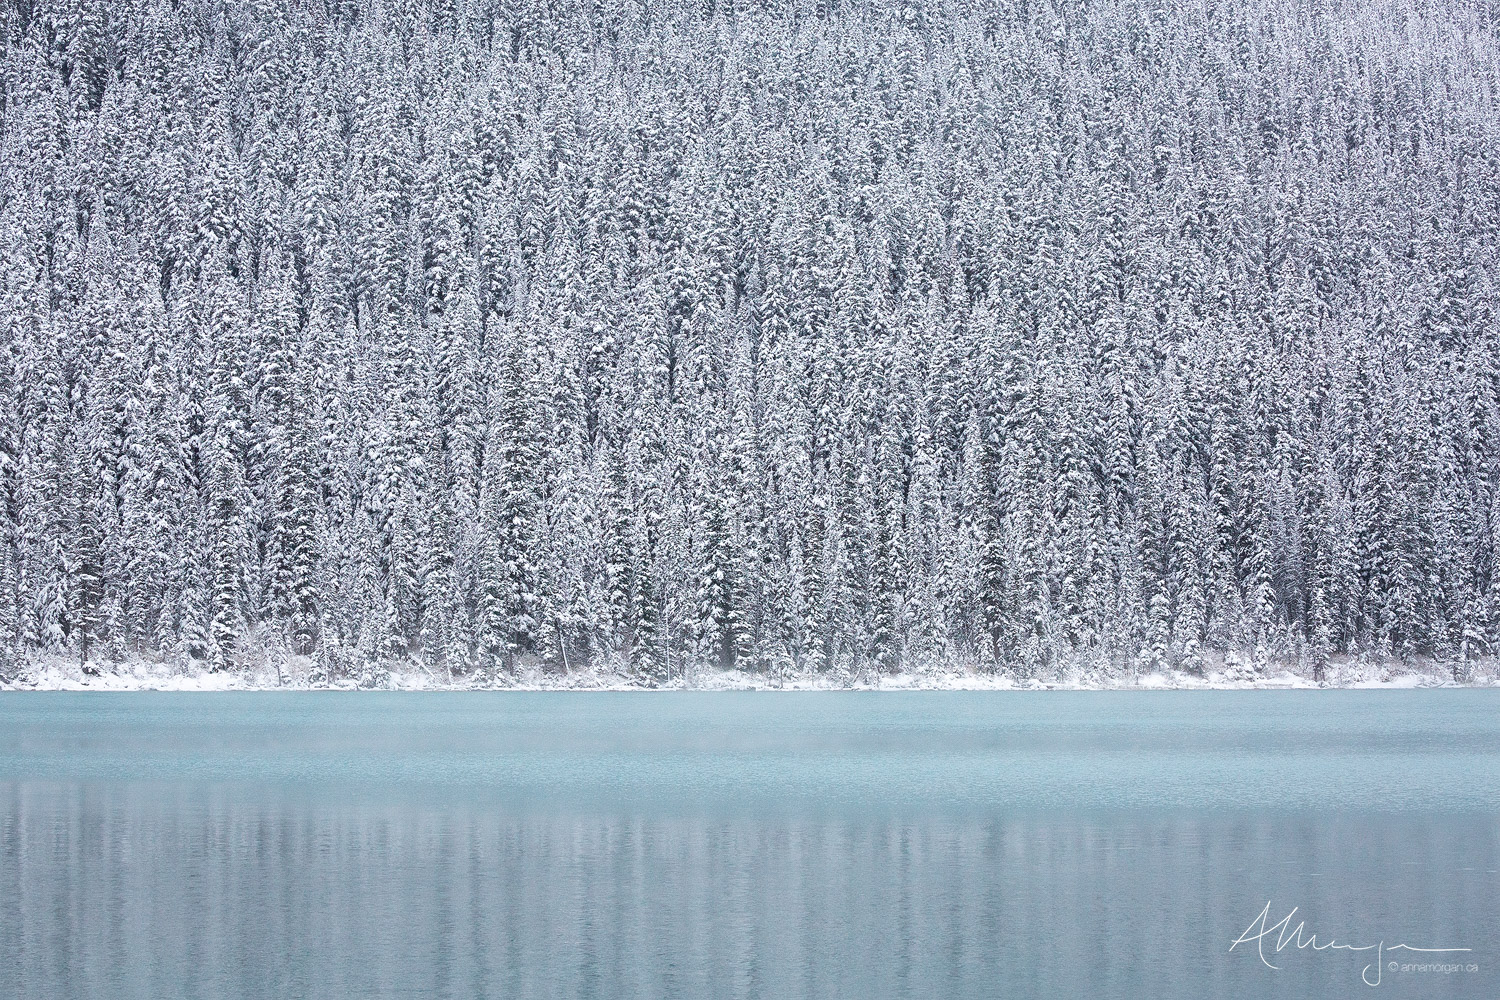 Winter snow-laden trees are reflected in the quiet waters of Lake Louise, Alberta.